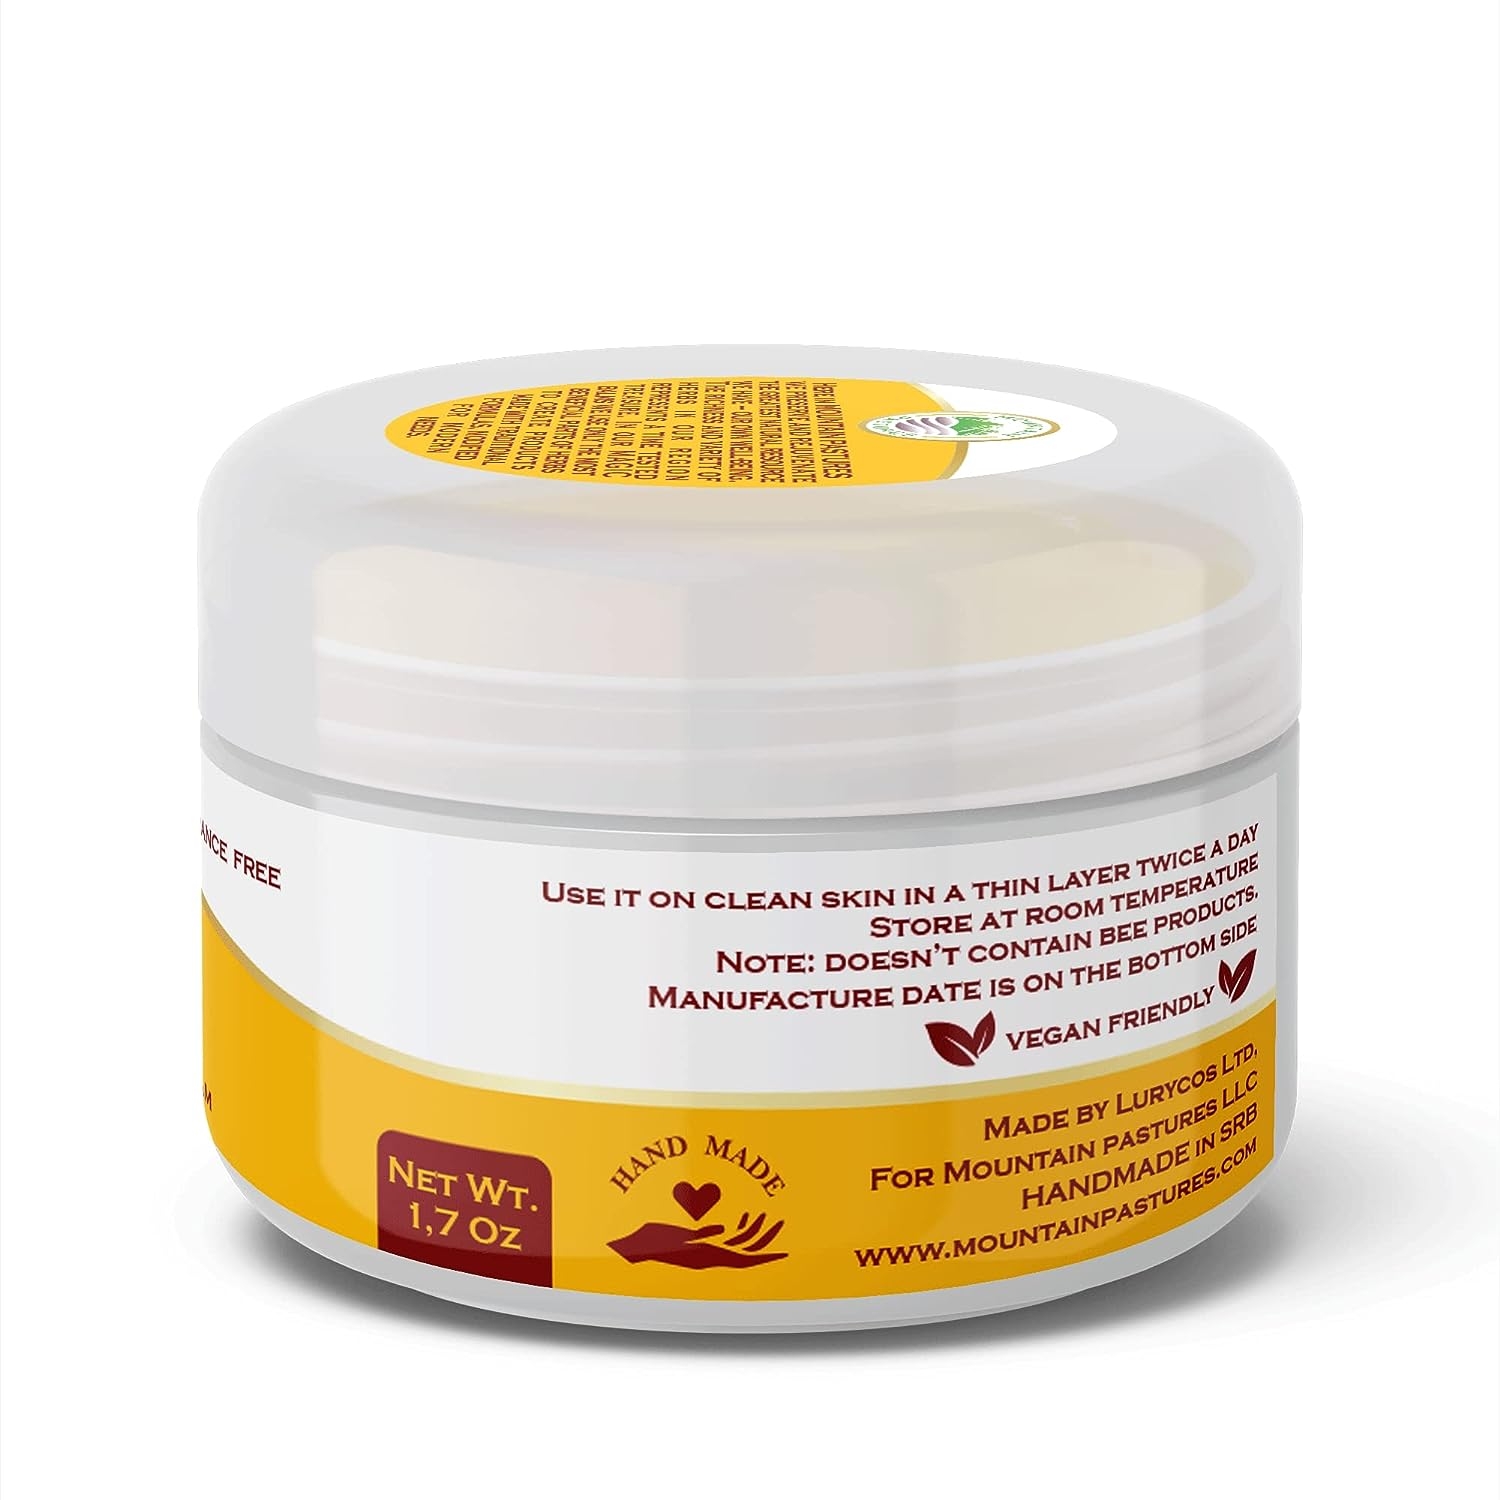 NEW Gentle Bikini Area and Underarm Cream with Marigold Oil and Shea Butter  - Soothes Sensitive Skin Post-Waxing